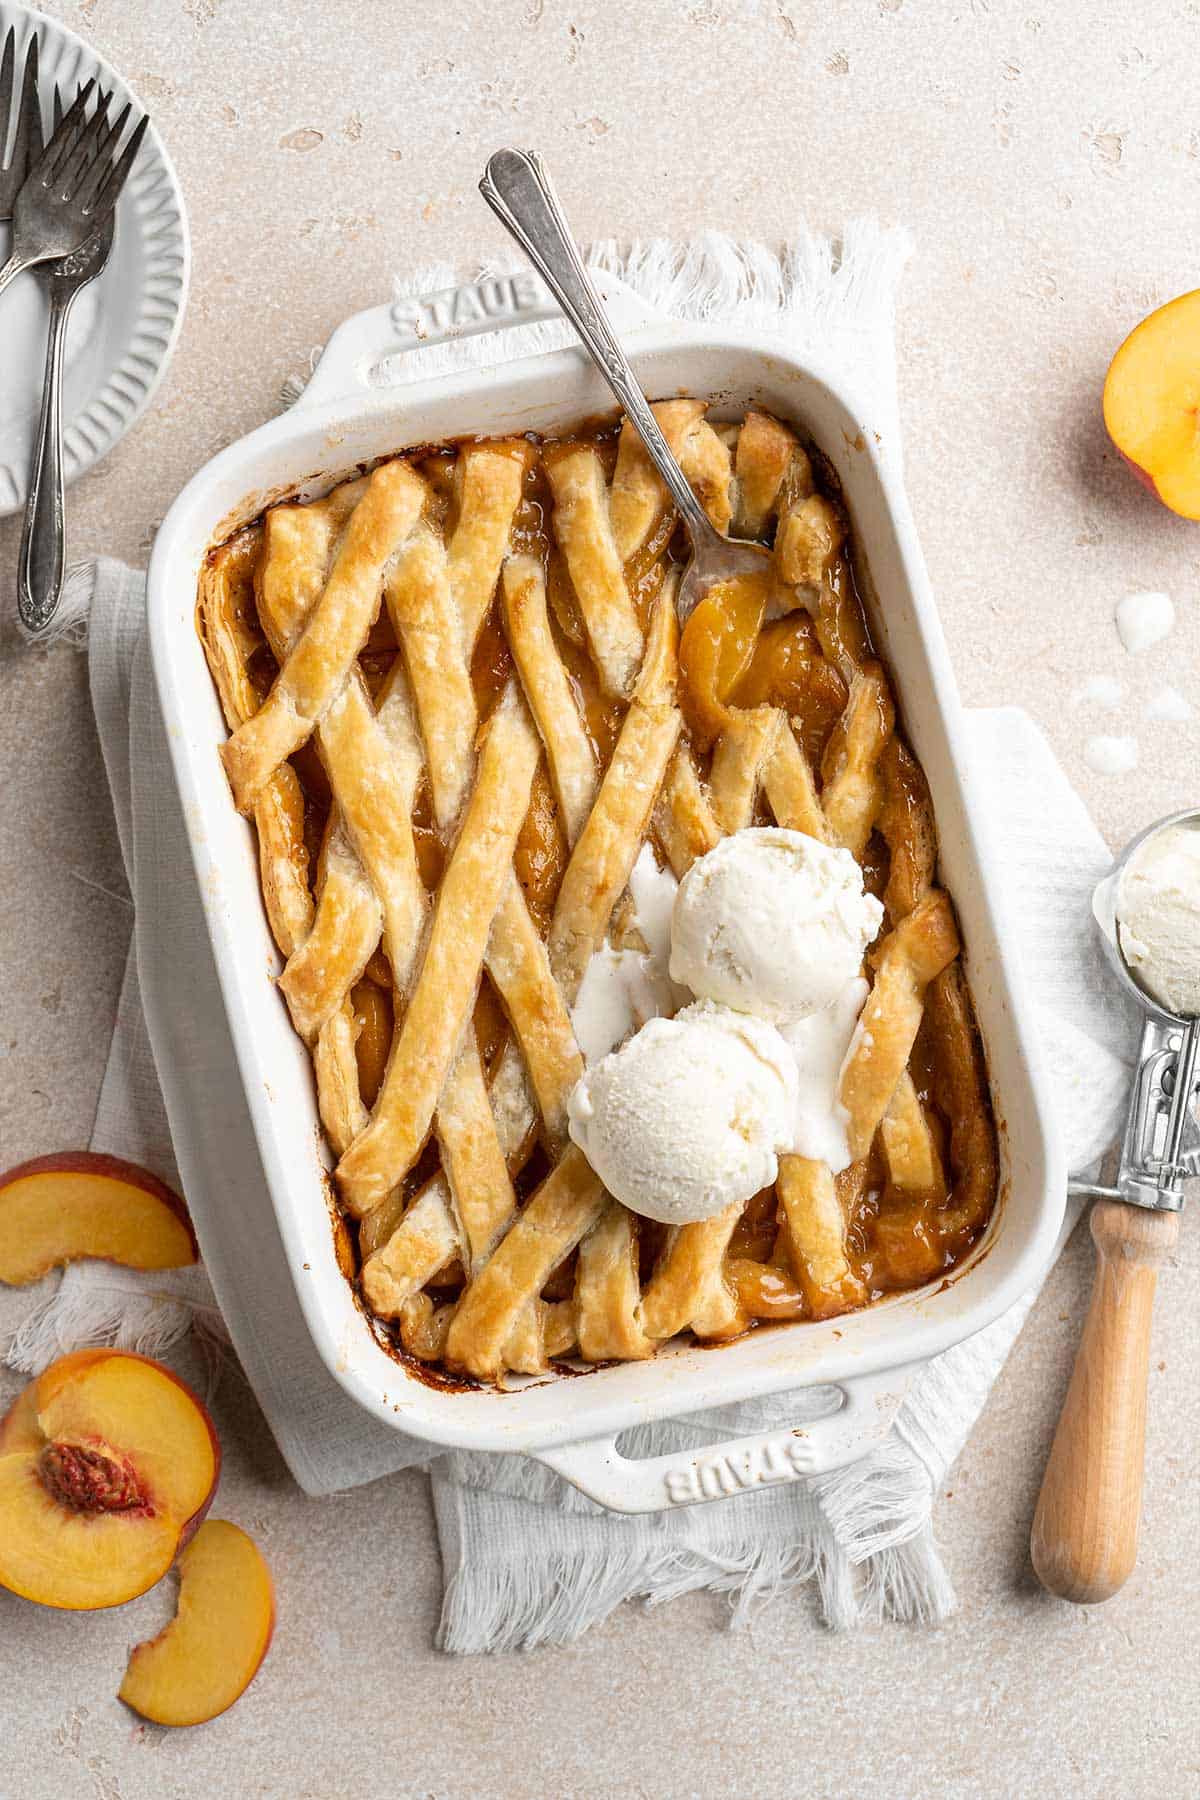 Southern peach cobbler with canned peaches served up in a casserole dish with a spoon digging into it and two scoops of ice cream on top.